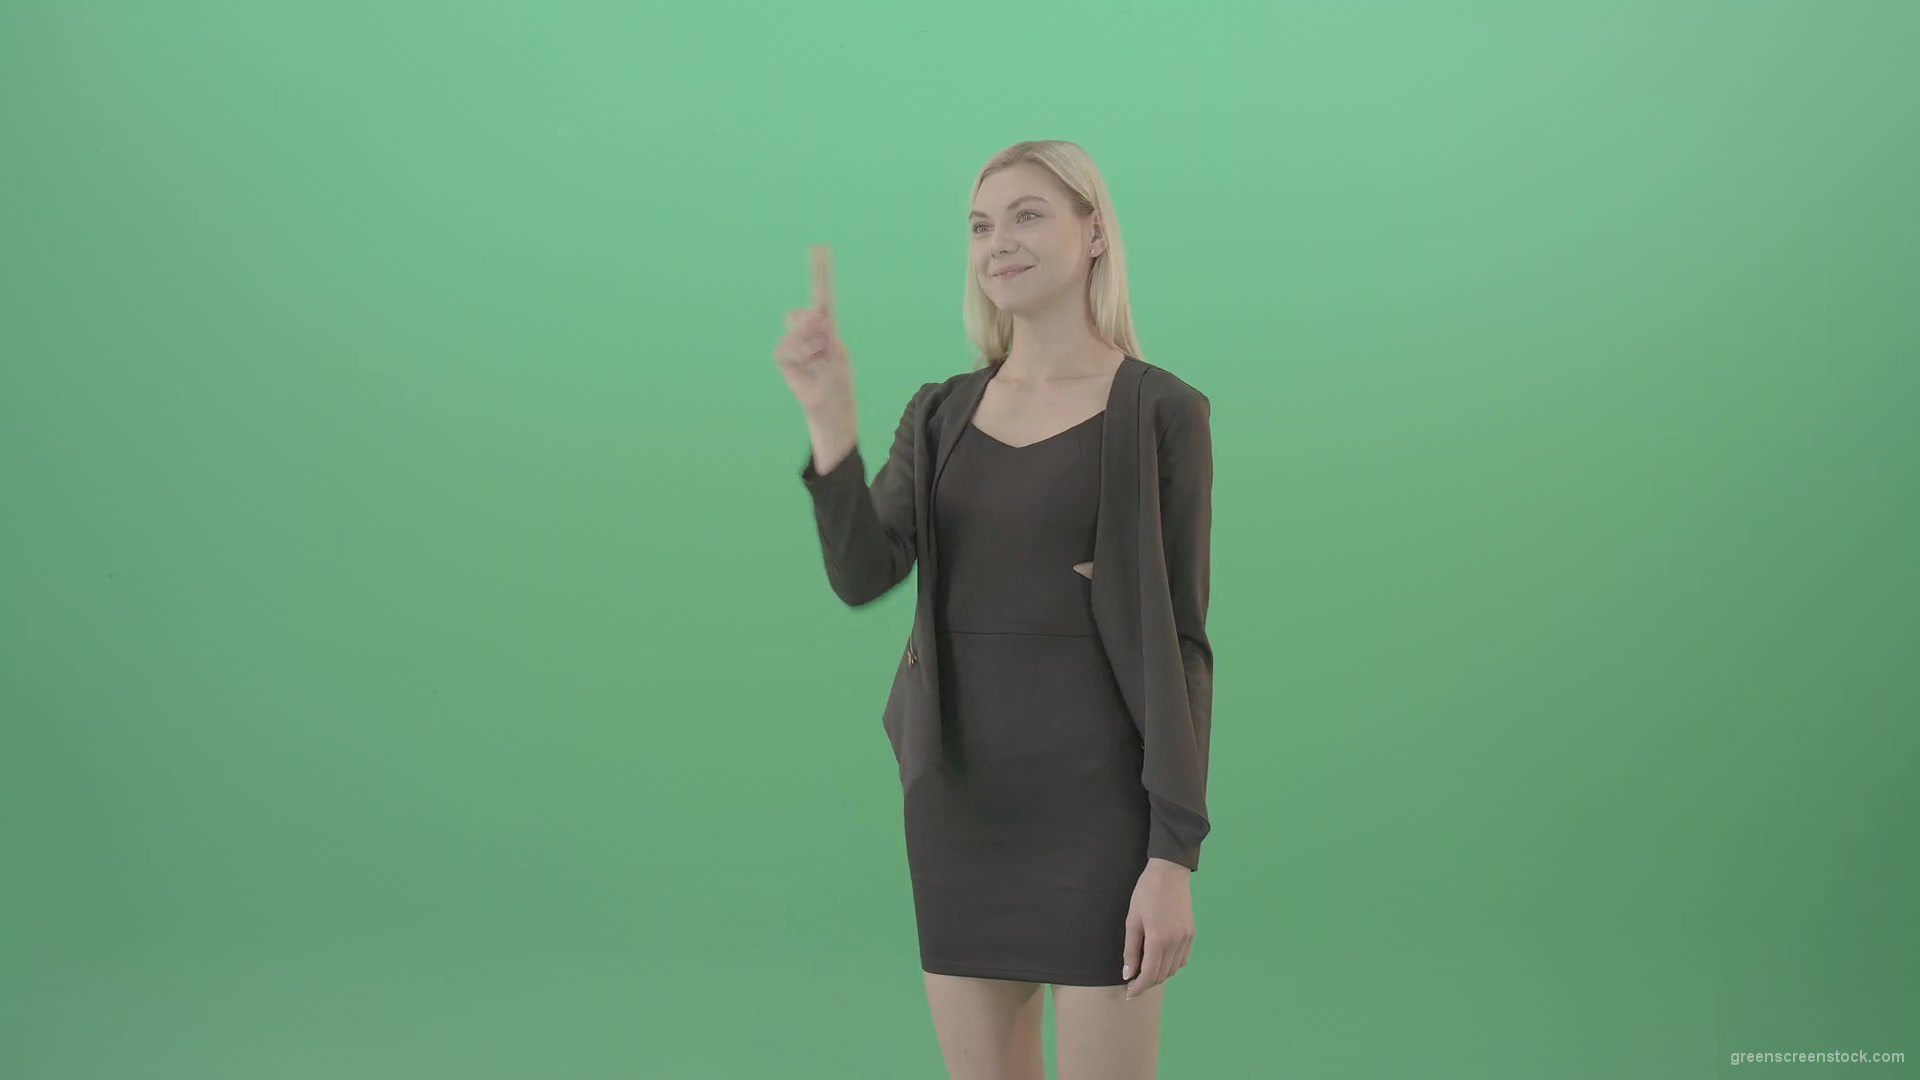 Blonde-girl-in-black-costume-slide-virtual-products-in-touch-display-on-green-screen-4K-Video-Footage-1920_008 Green Screen Stock